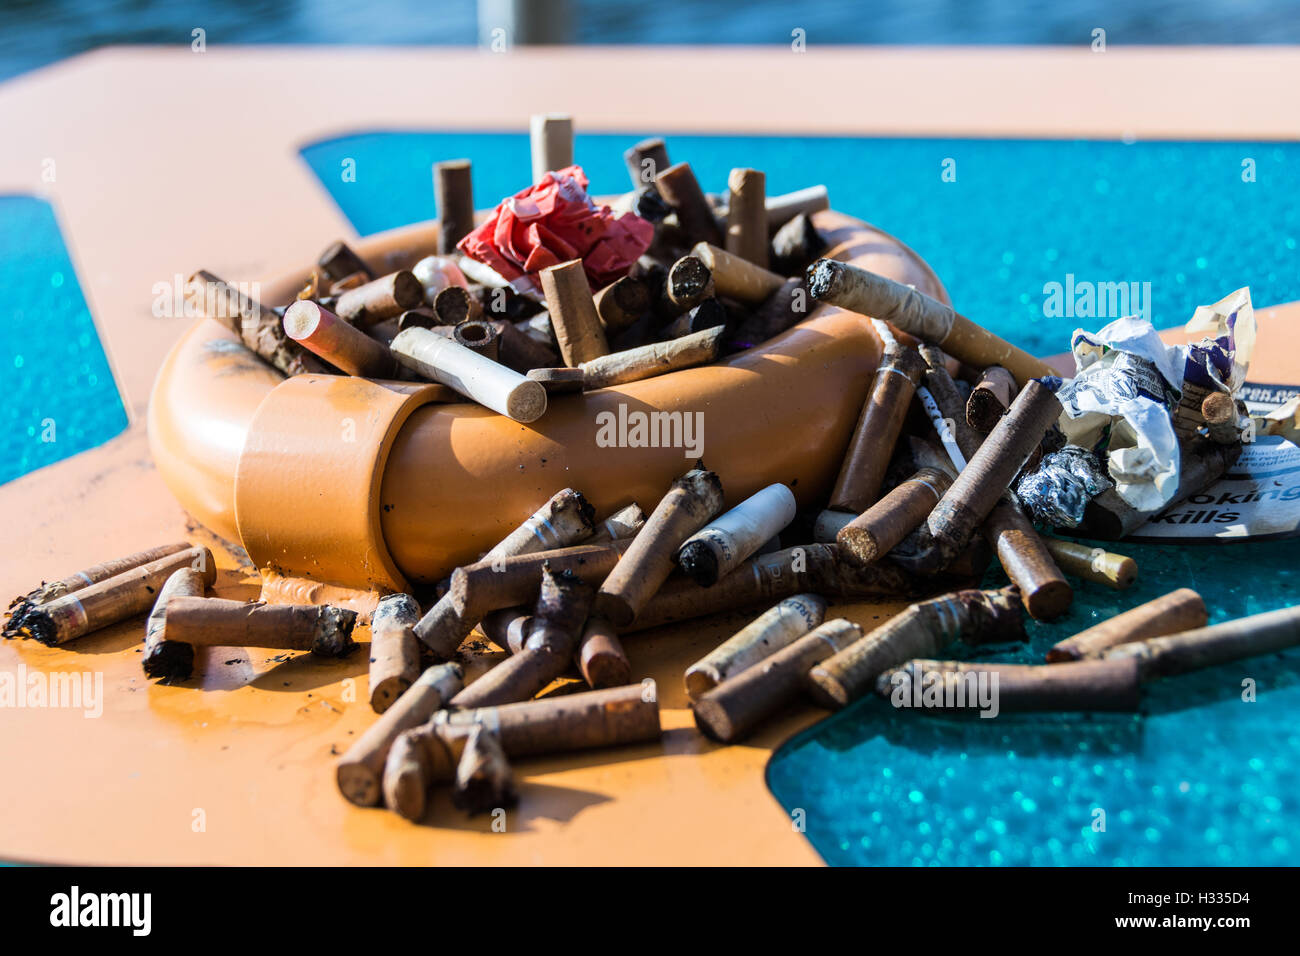 Cigarette butts in a heavily overflowing ashtray Stock Photo